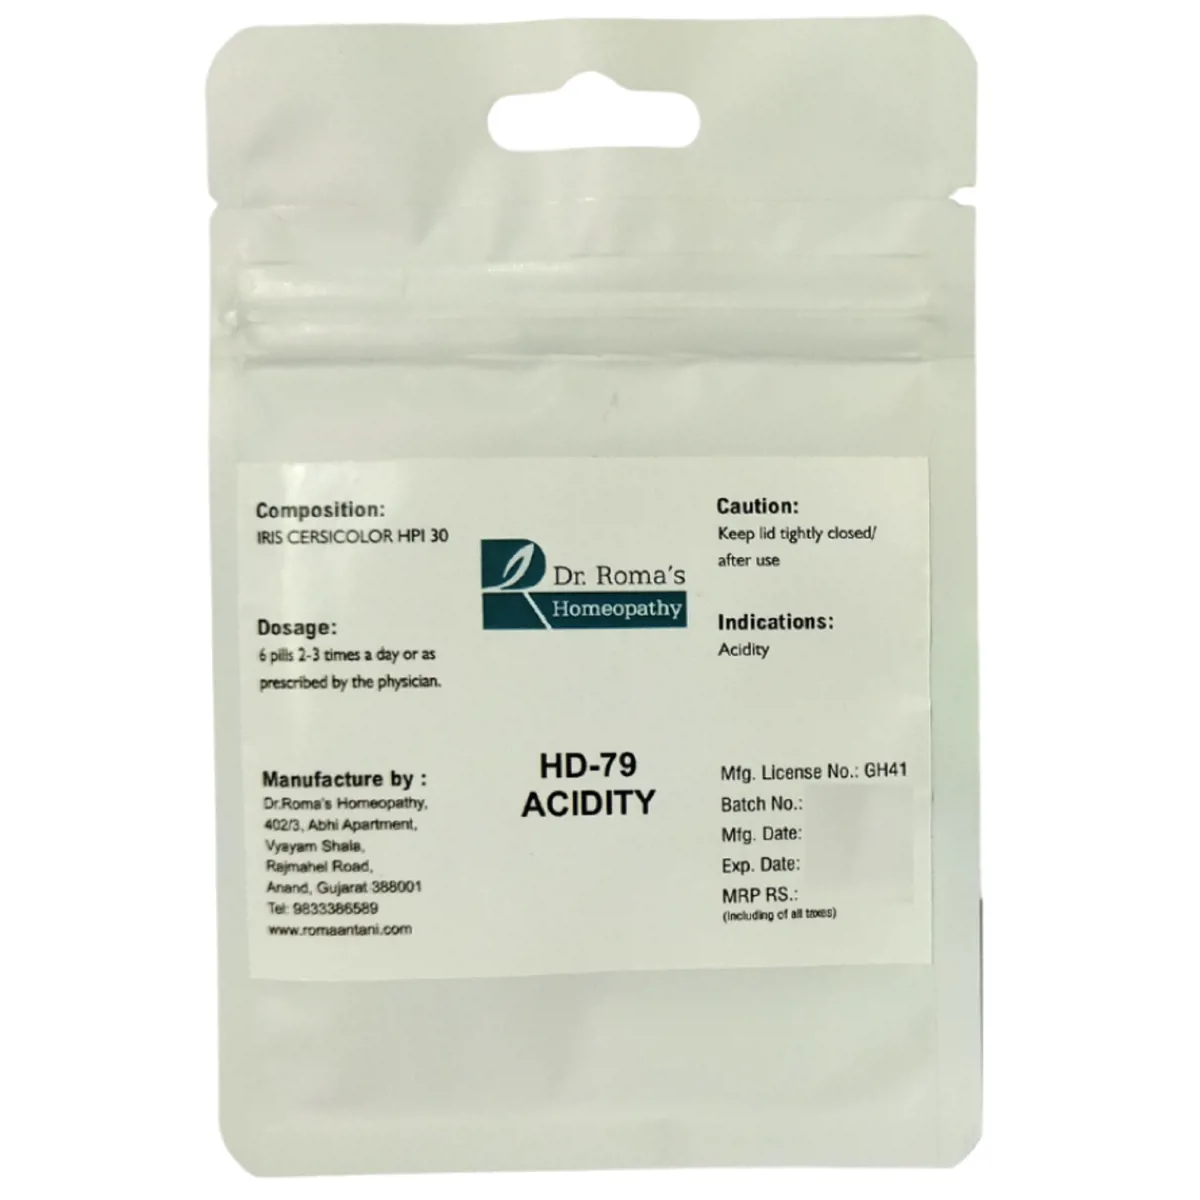 Dr Romas Homeopathy HD-79 Acidity 2 Bottles of 2 Dram 16g